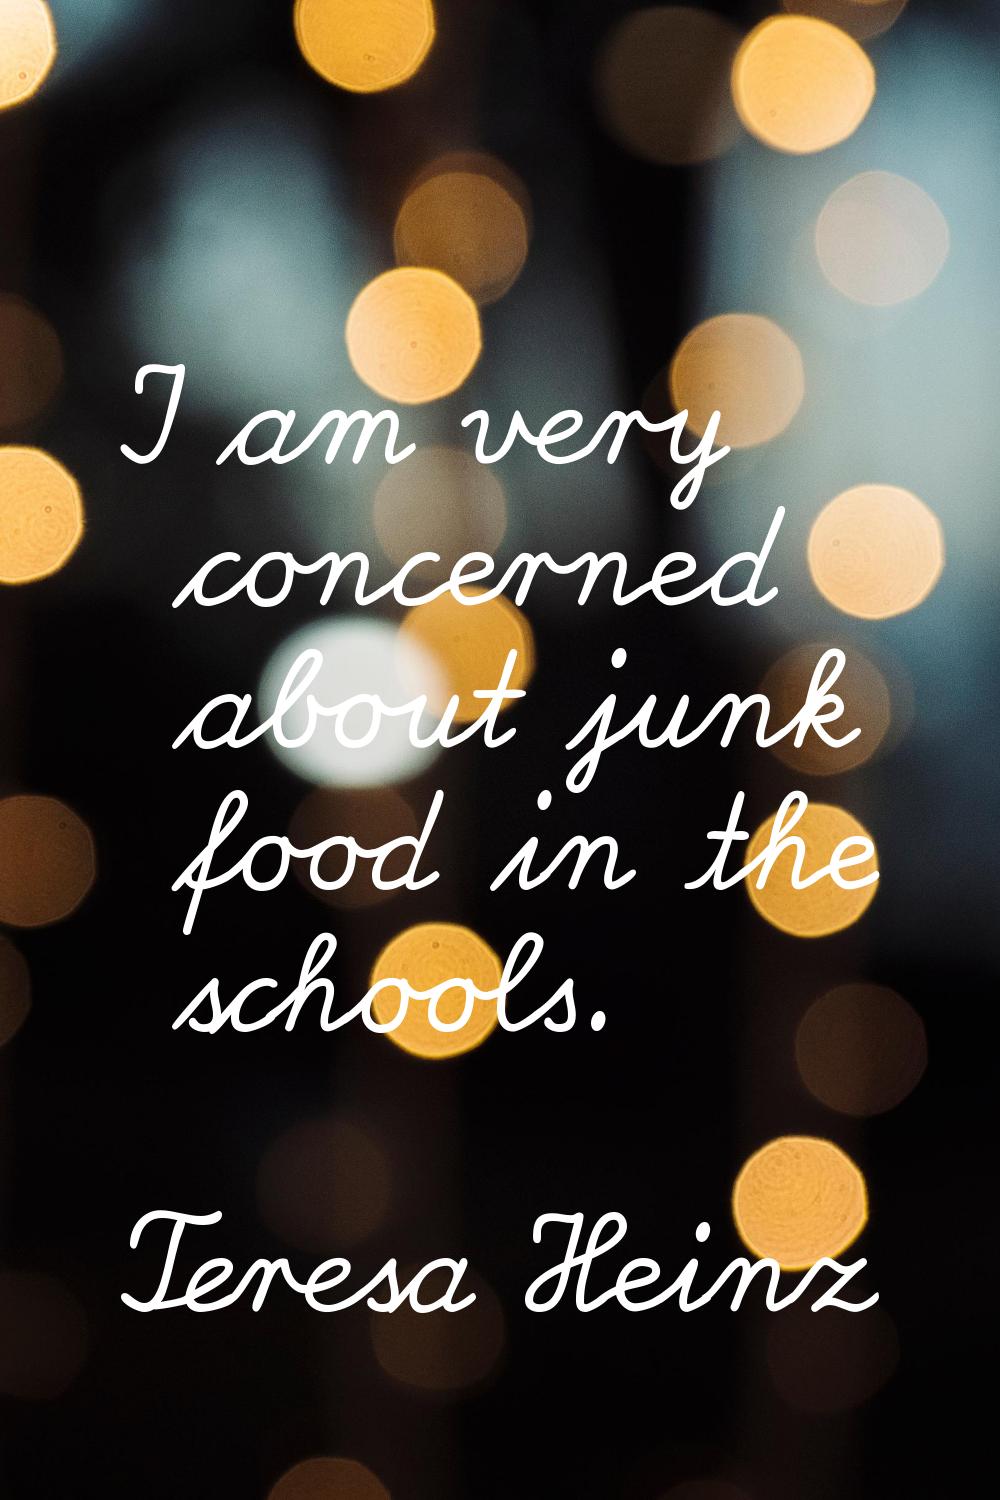 I am very concerned about junk food in the schools.